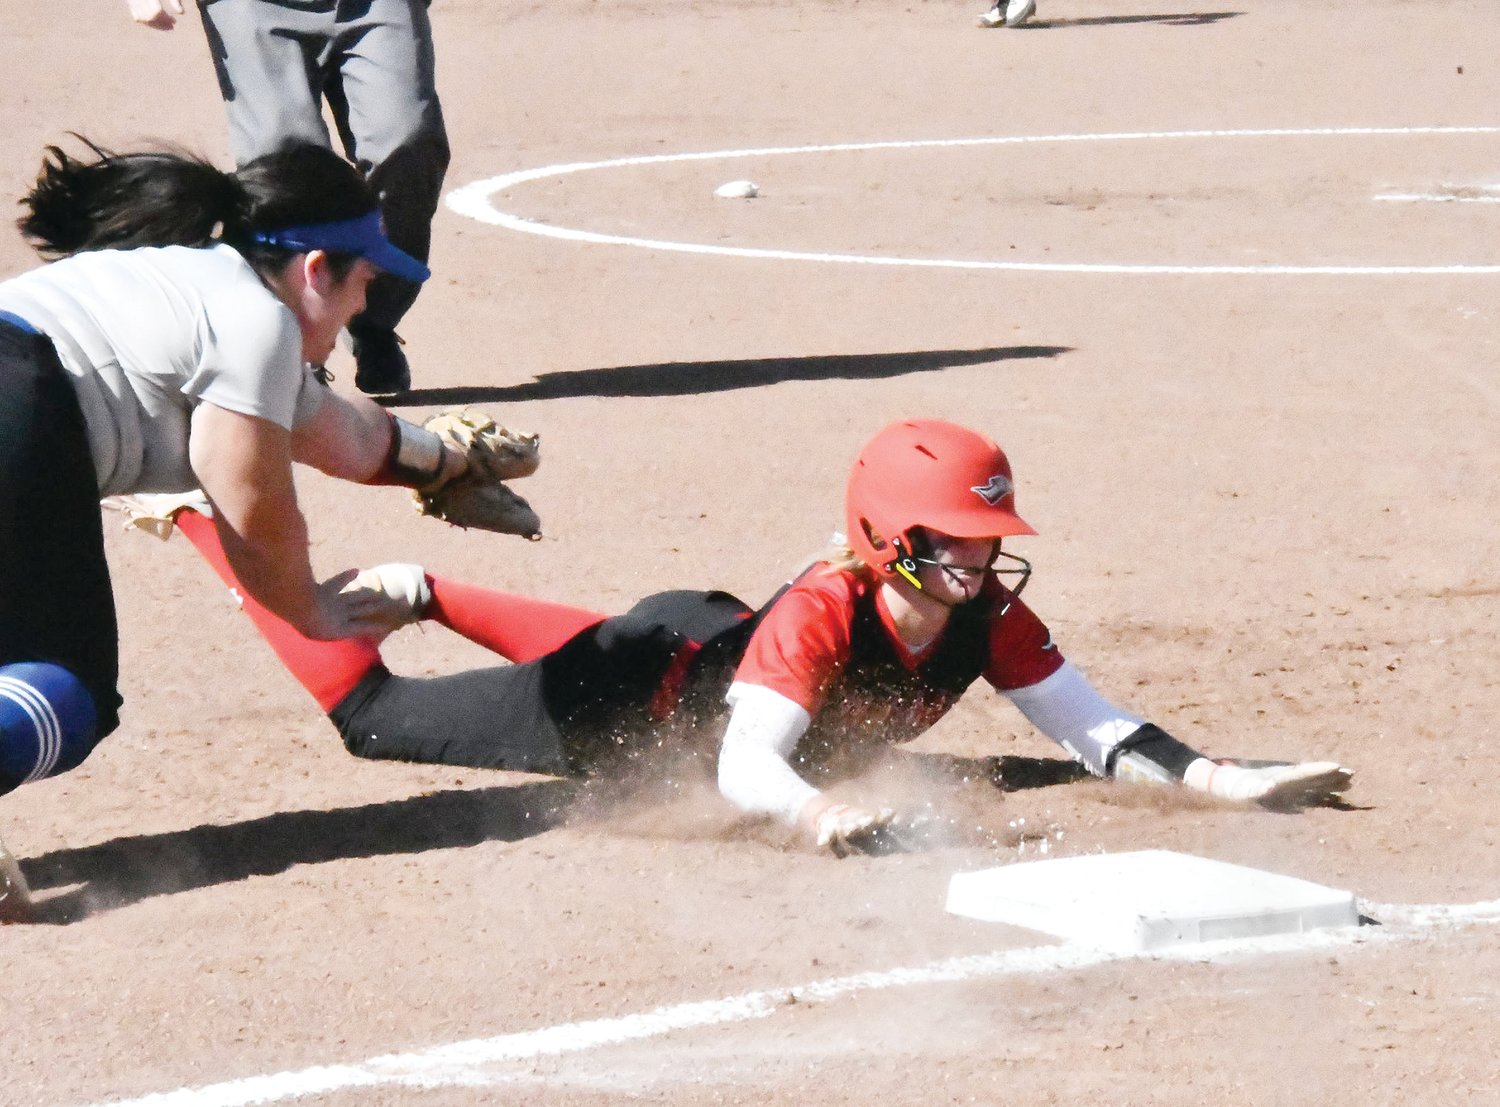 Moberly Area Community College softball player Emma Bruno slides into third base safely. Bruno, who is from Macon, was the first-ever recruit signed to play softball for the Greyhounds.